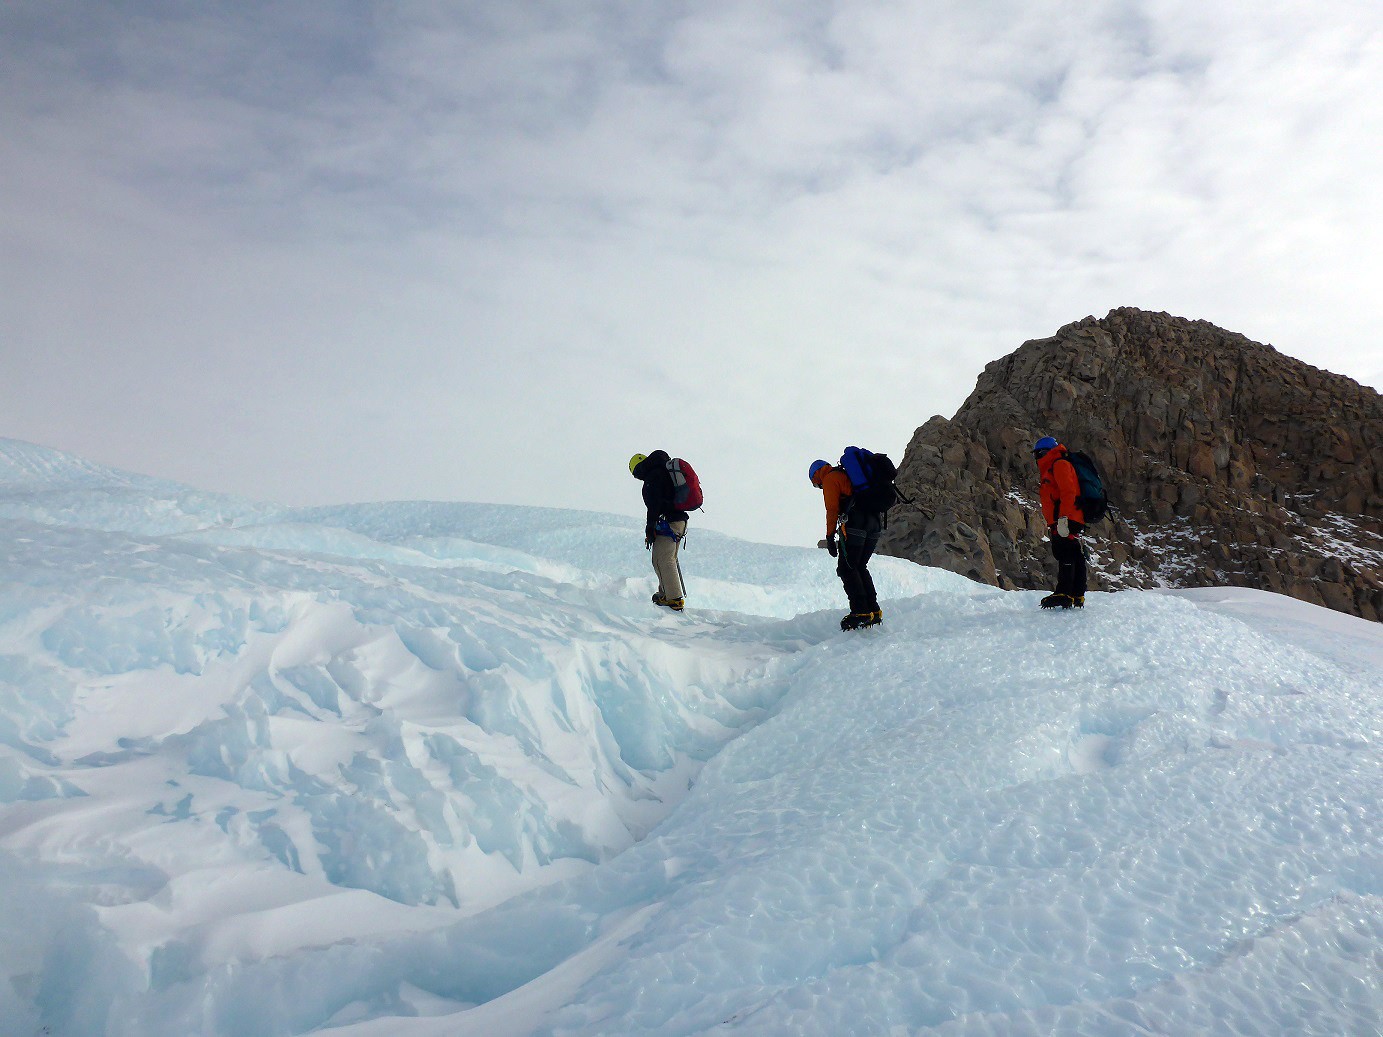 The sampling team ascends a peak to recover bedrock samples from the Ohio Range